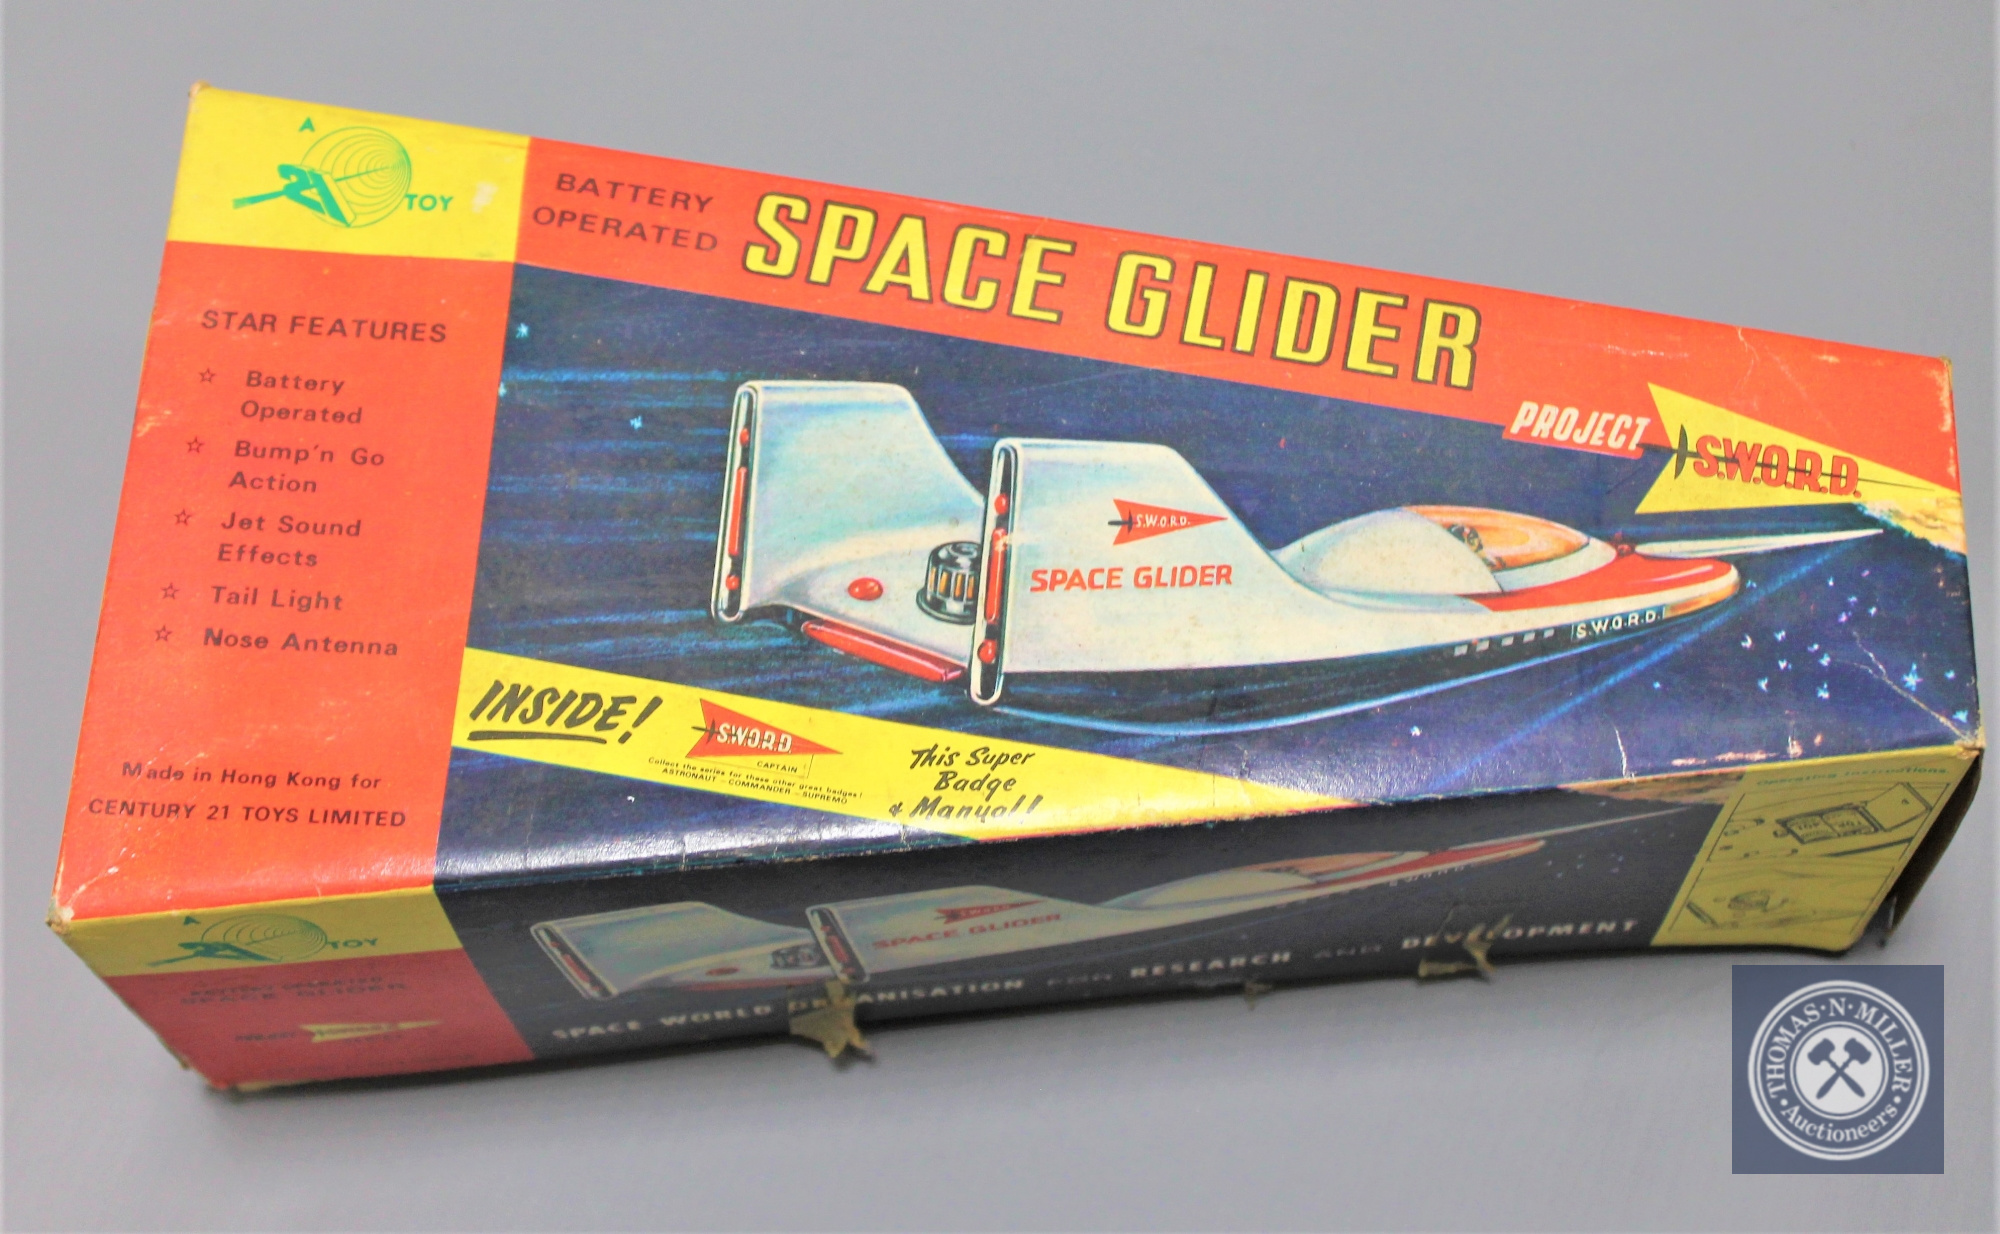 A Century 21 Limited battery operated Space Glider Project S.W.O.R.D. boxed.